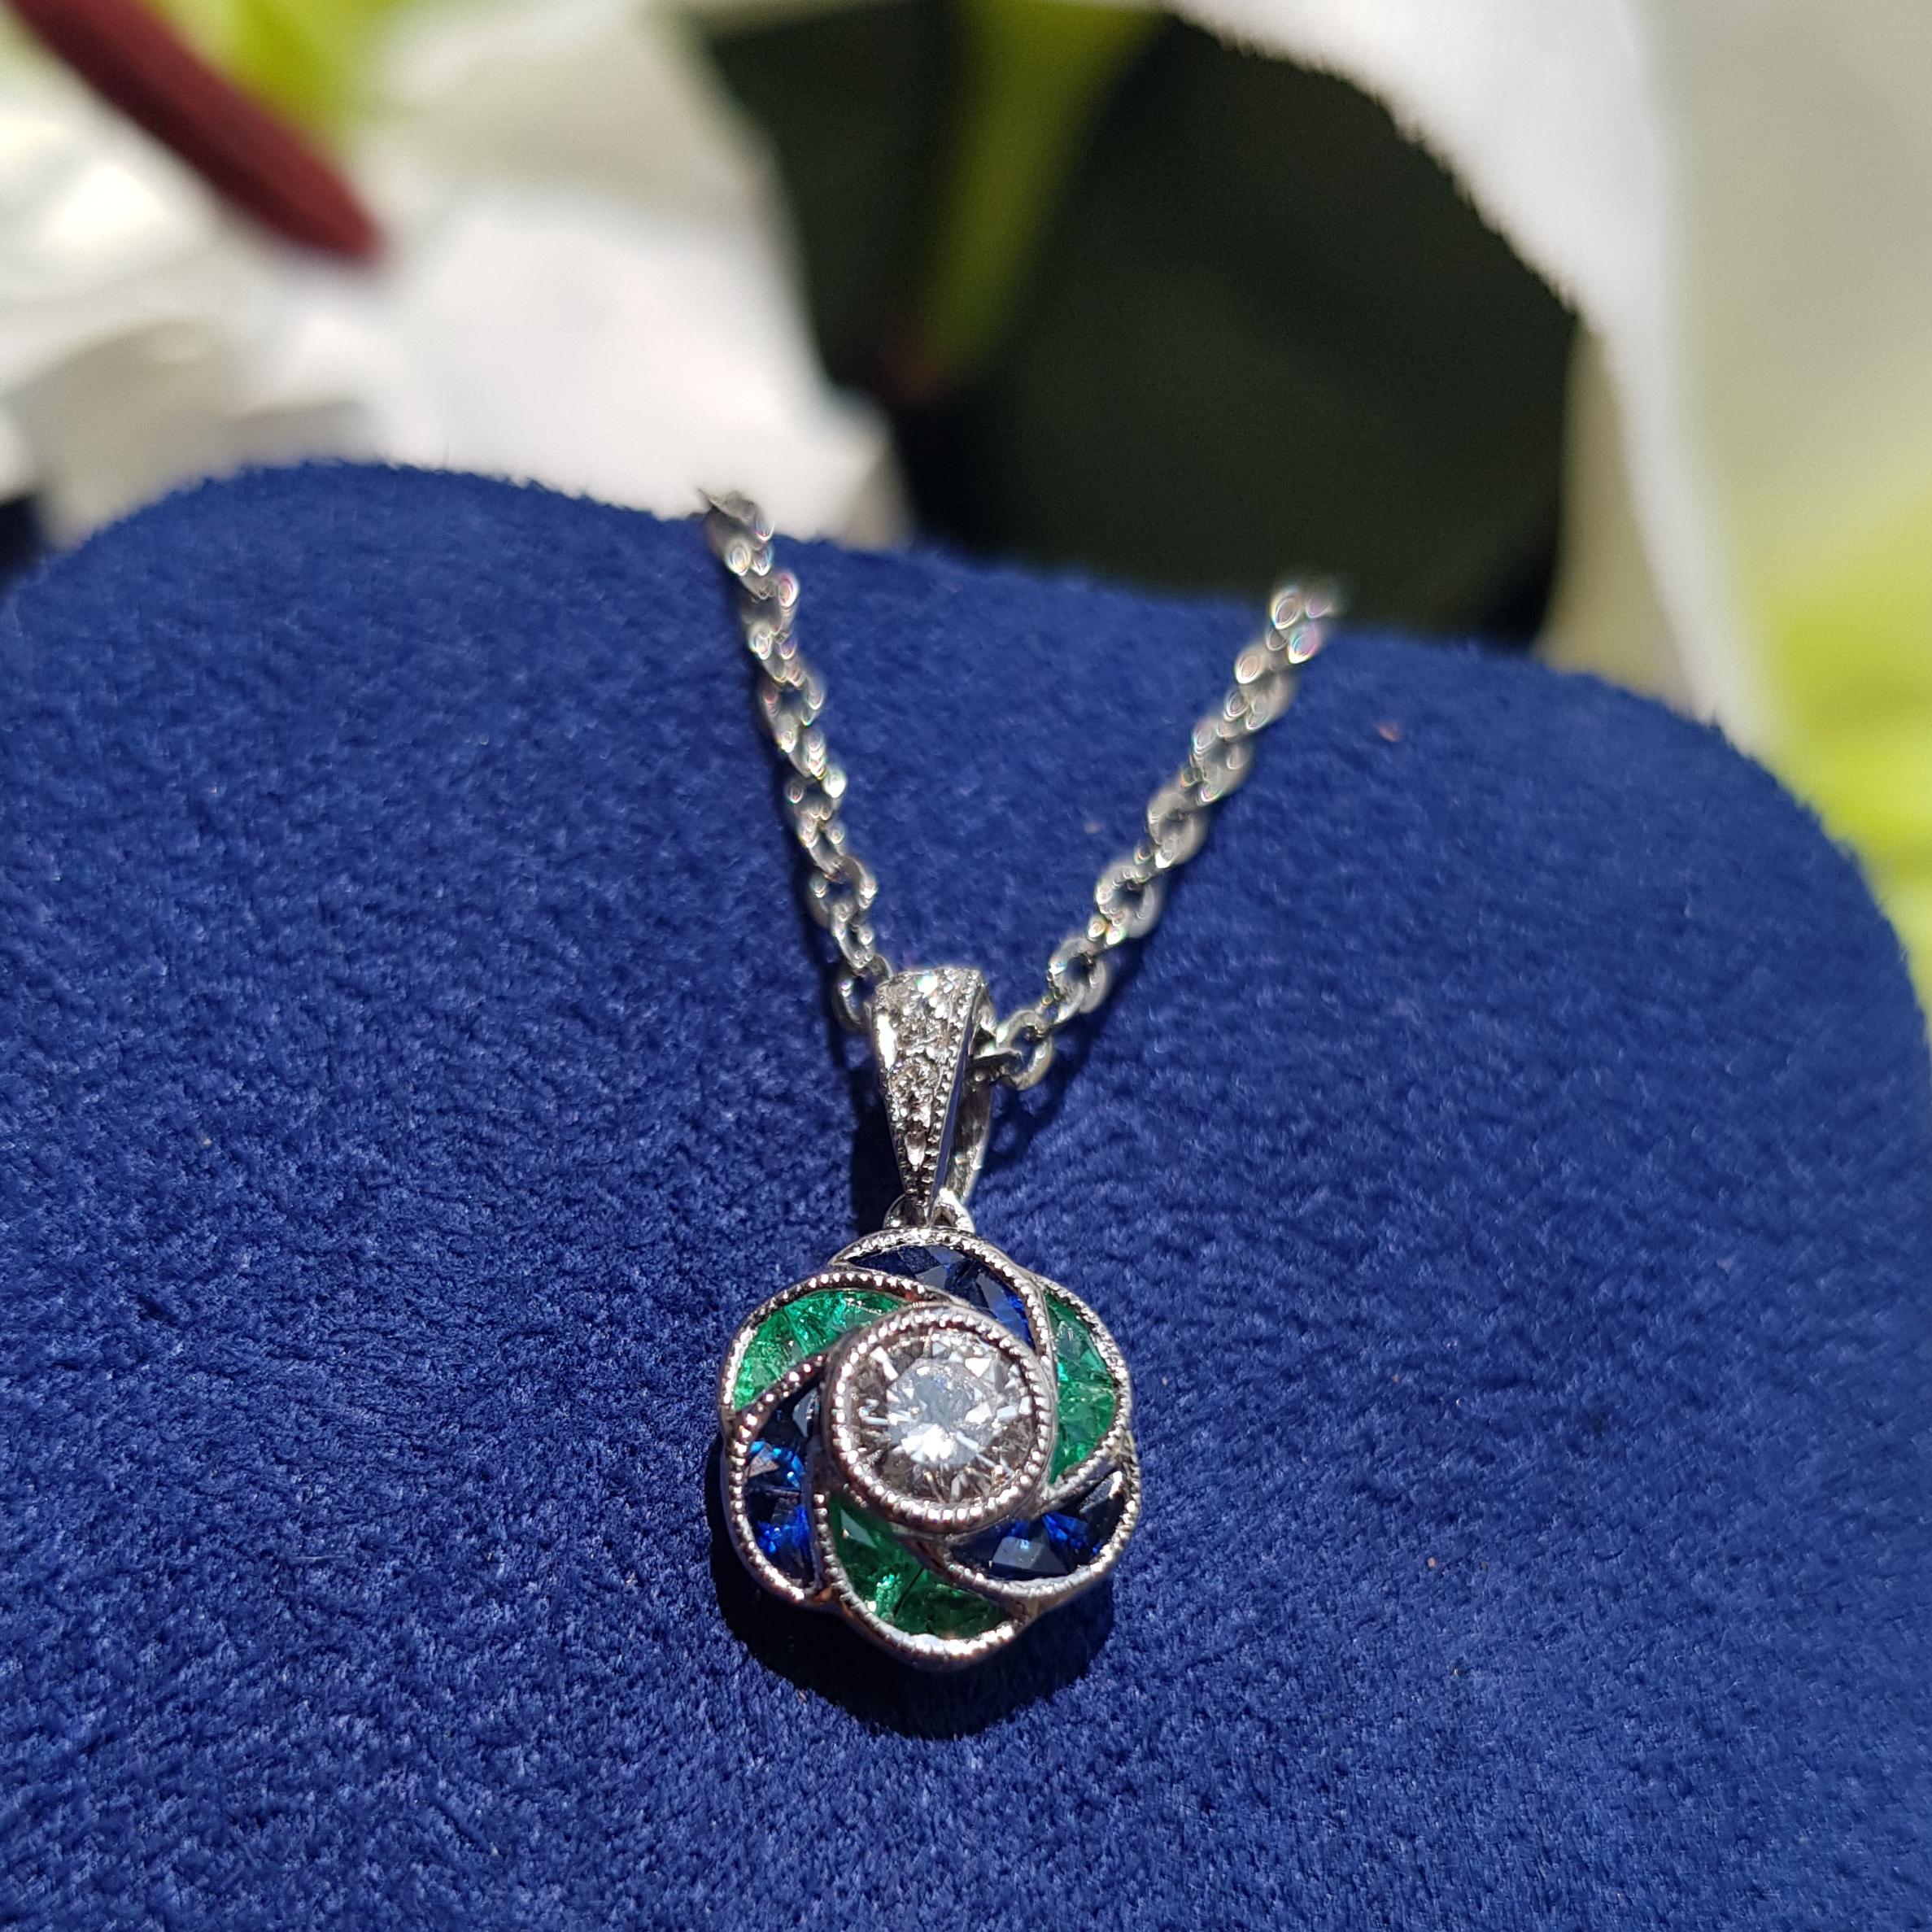 Perfect with everyday wear, this charming vintage Art Deco revivalist design pendant features brilliant-cut diamonds surrounded by emerald and bright blue sapphire for rose petals finished look all in 18K white gold.

Information
Style: